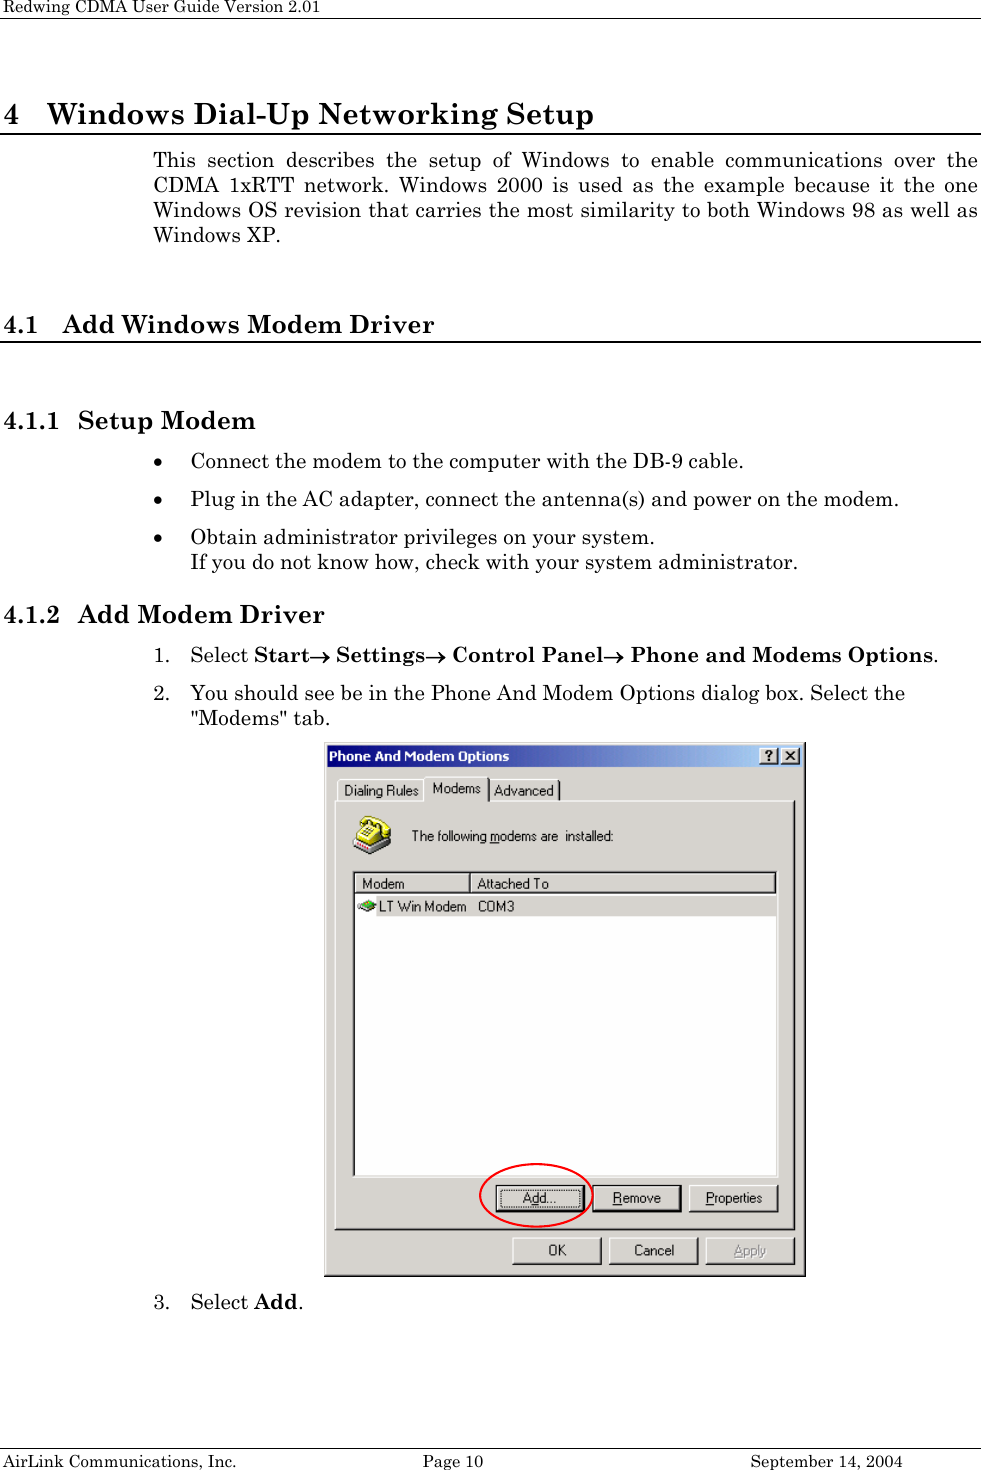 Redwing CDMA User Guide Version 2.01 4 Windows Dial-Up Networking Setup This section describes the setup of Windows to enable communications over the CDMA 1xRTT network. Windows 2000 is used as the example because it the one Windows OS revision that carries the most similarity to both Windows 98 as well as Windows XP.  4.1 Add Windows Modem Driver  4.1.1 Setup Modem • Connect the modem to the computer with the DB-9 cable. • Plug in the AC adapter, connect the antenna(s) and power on the modem. • Obtain administrator privileges on your system.  If you do not know how, check with your system administrator. 4.1.2 Add Modem Driver 1. Select Start→ Settings→ Control Panel→ Phone and Modems Options. 2. You should see be in the Phone And Modem Options dialog box. Select the &quot;Modems&quot; tab.  3. Select Add. AirLink Communications, Inc.  Page 10  September 14, 2004 